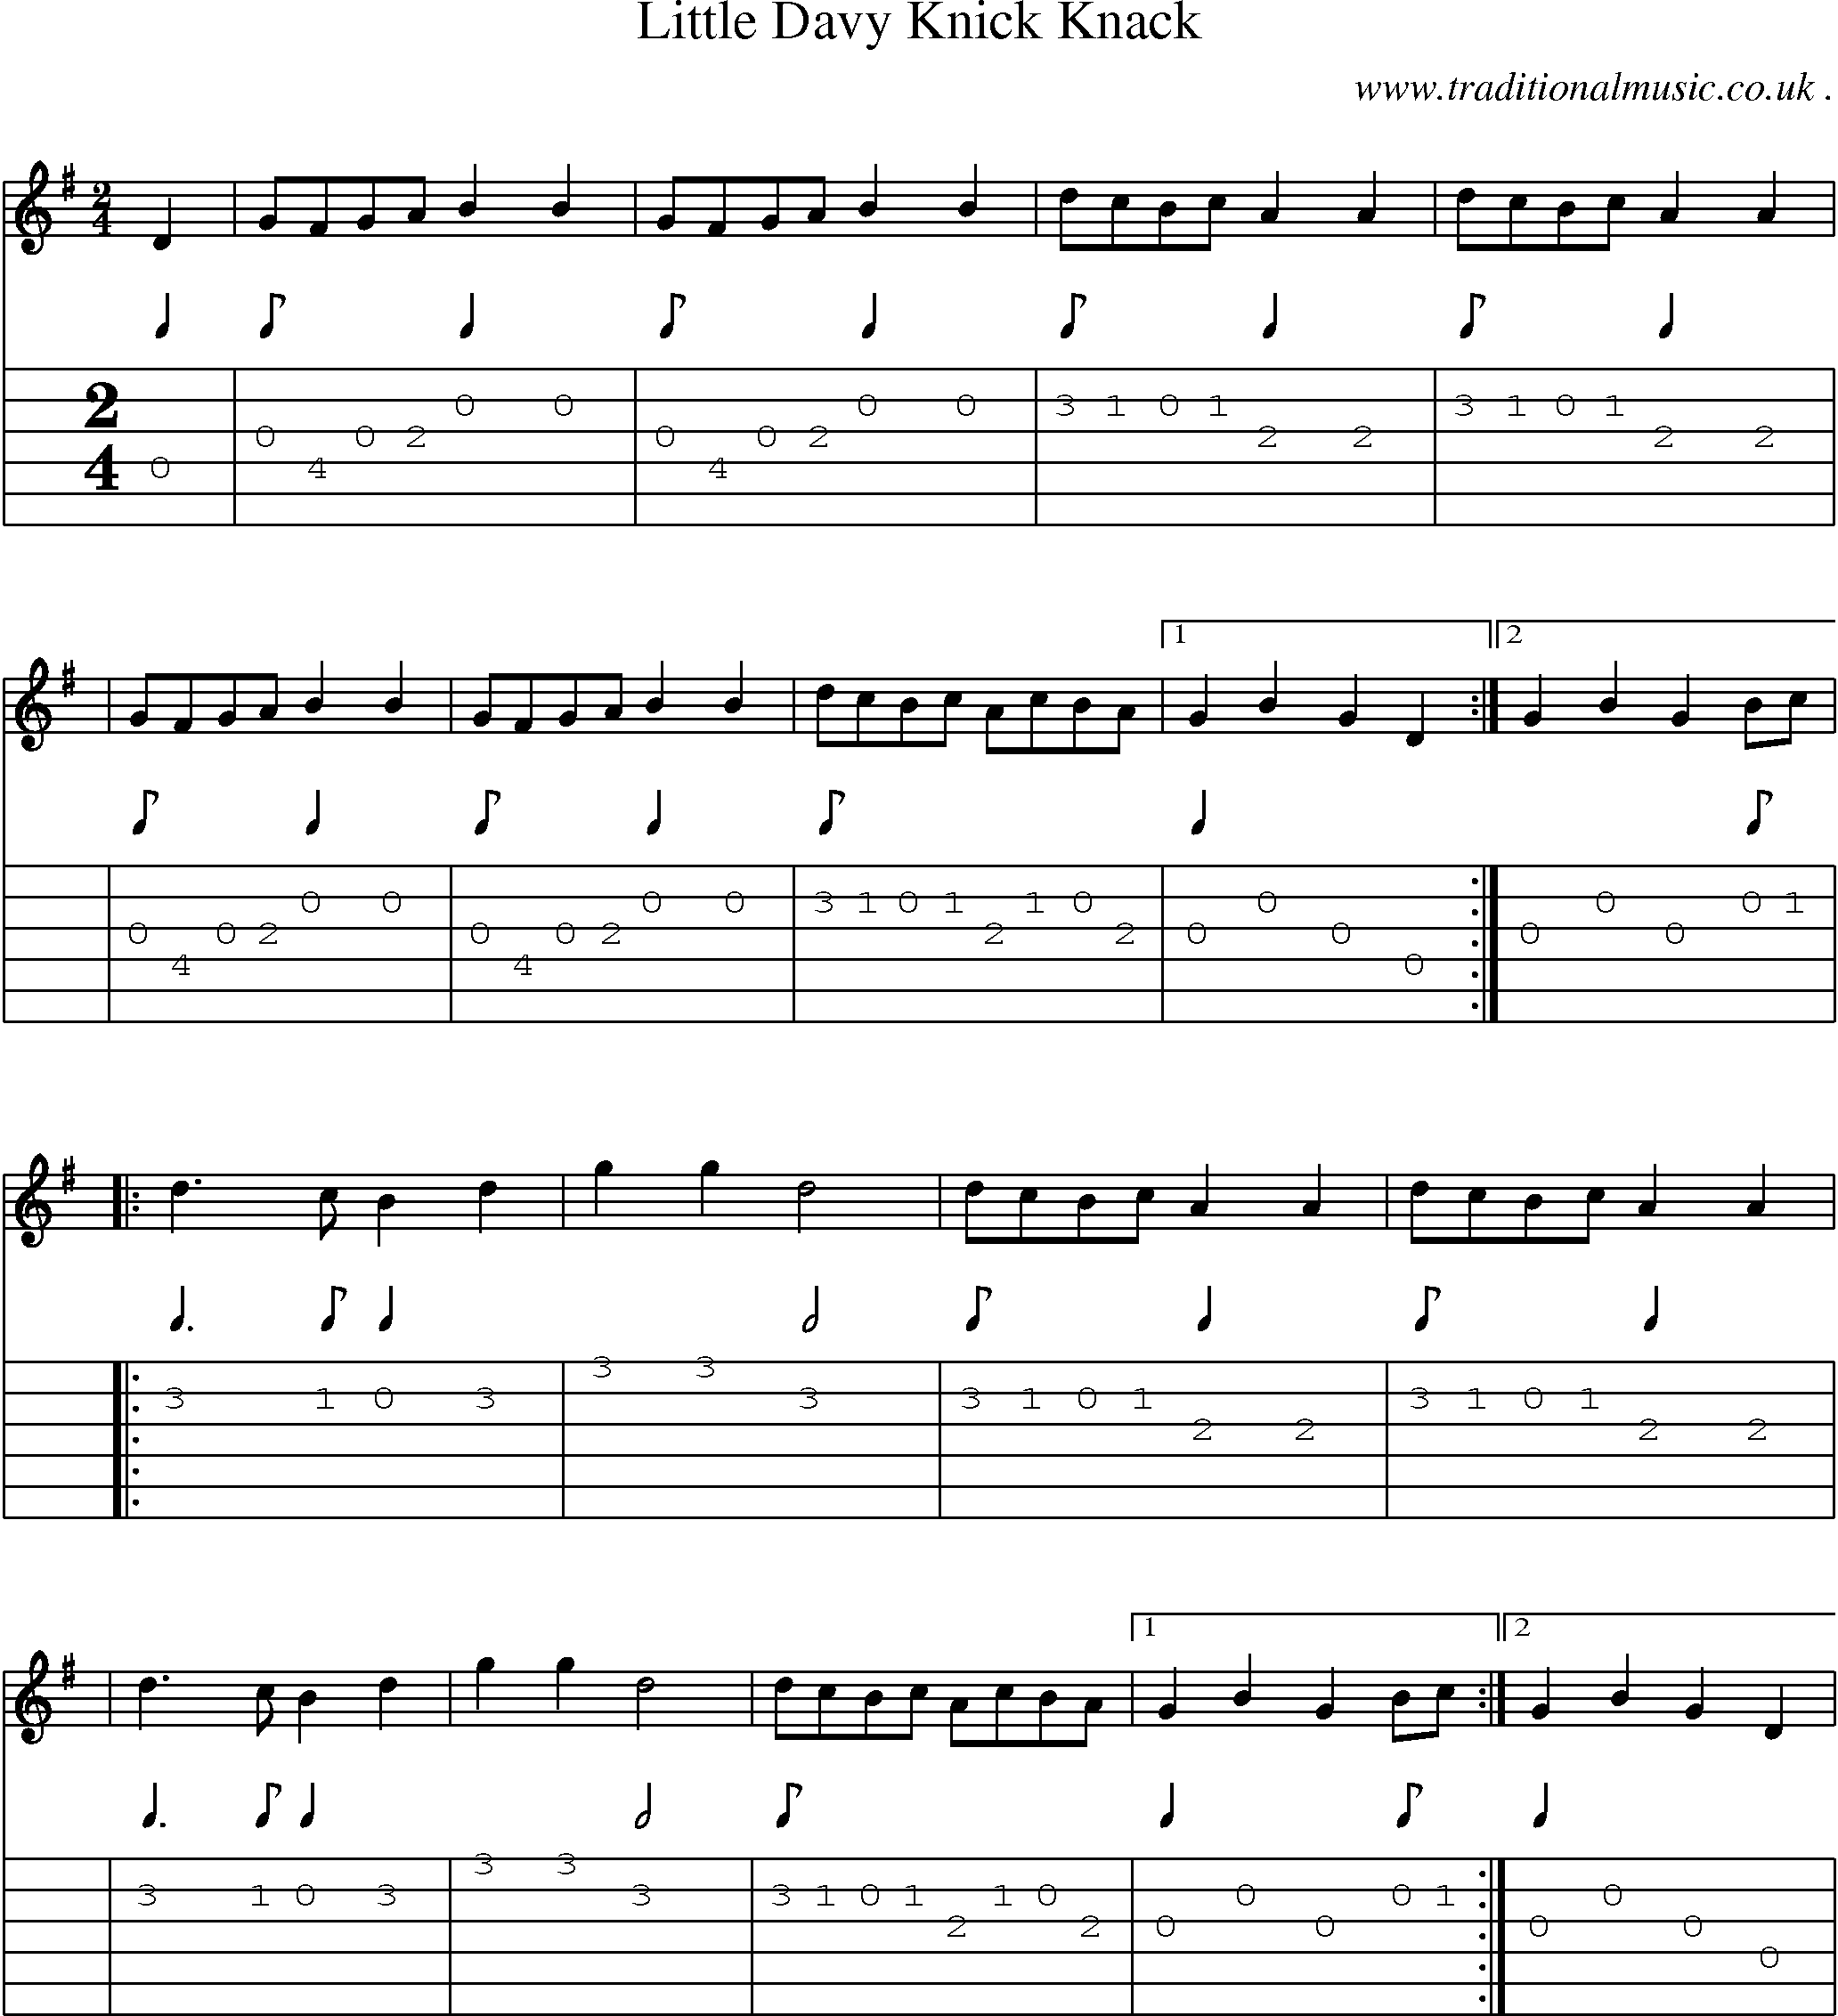 Sheet-Music and Guitar Tabs for Little Davy Knick Knack